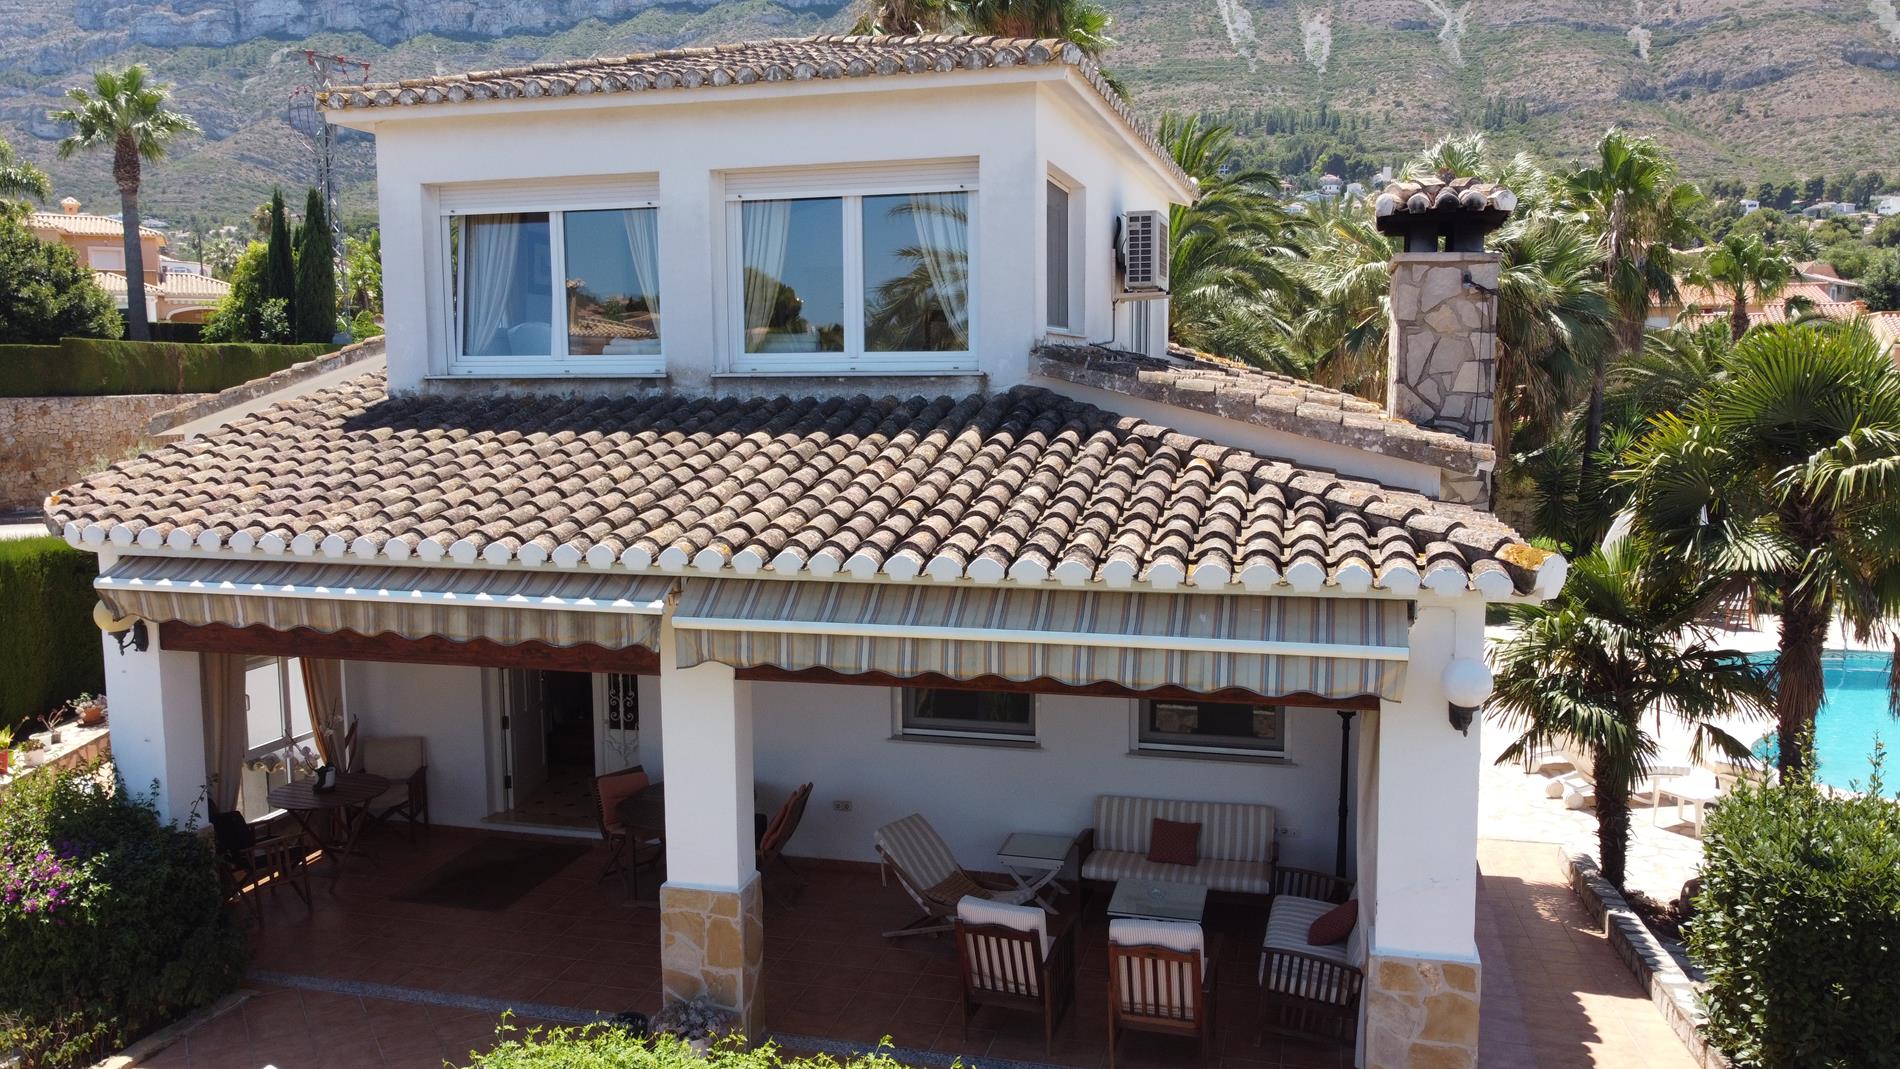 Great villa with pool for sale in Dénia